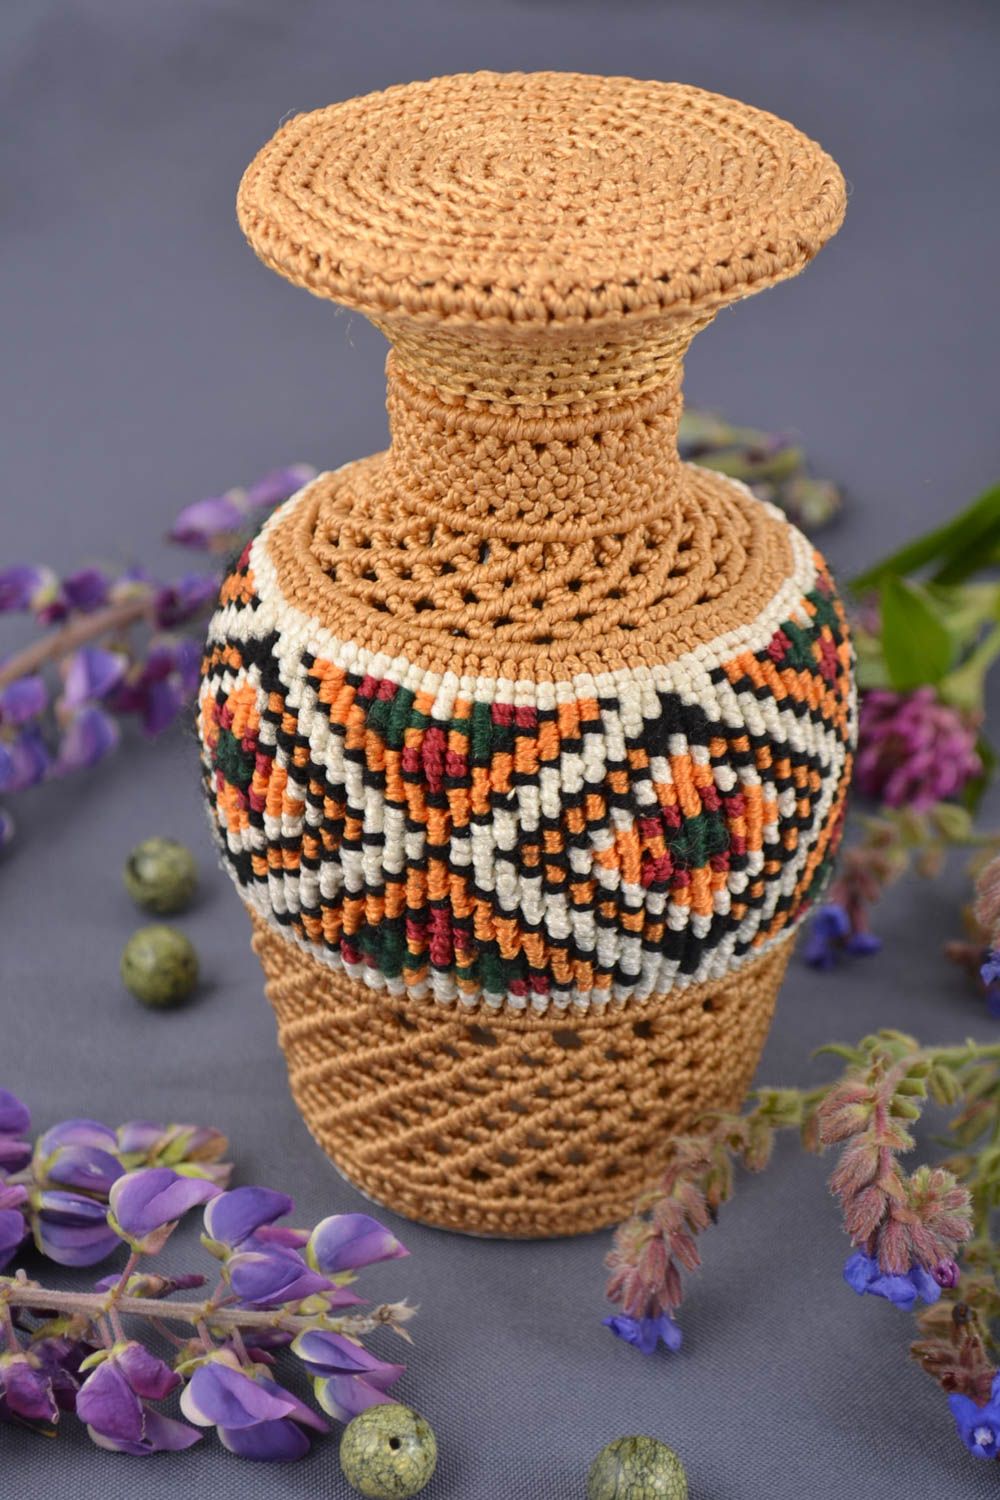 Handmade decorative glass bottle woven over with threads using macrame technique photo 1